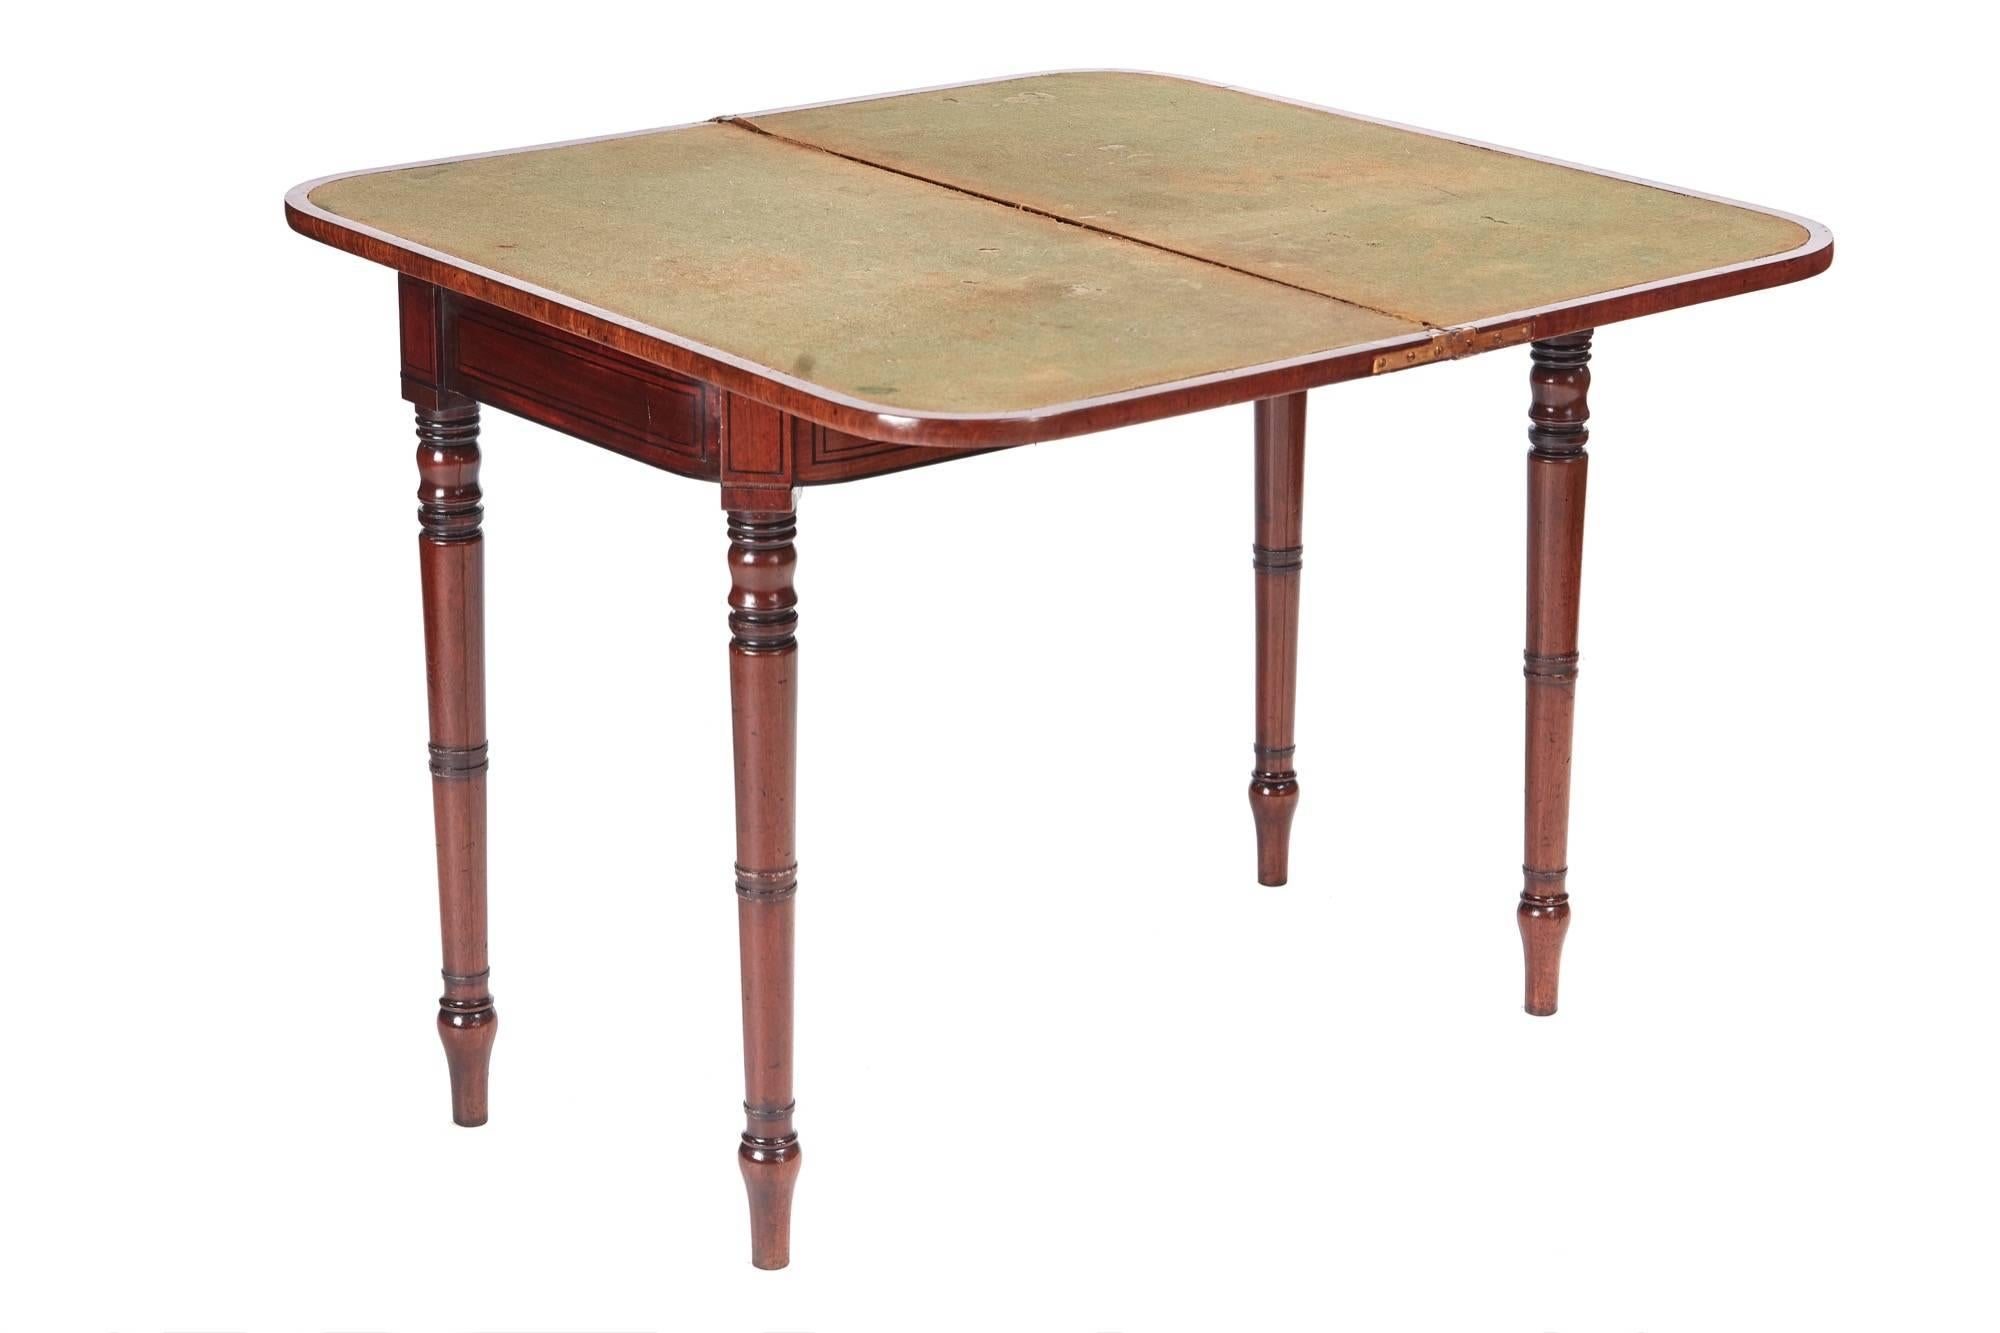 George III mahogany card table, with a lovely inlaid mahogany top, original green baize, inlaid frieze, standing on four lovely turned legs
Lovely color and condition
Measure: 30